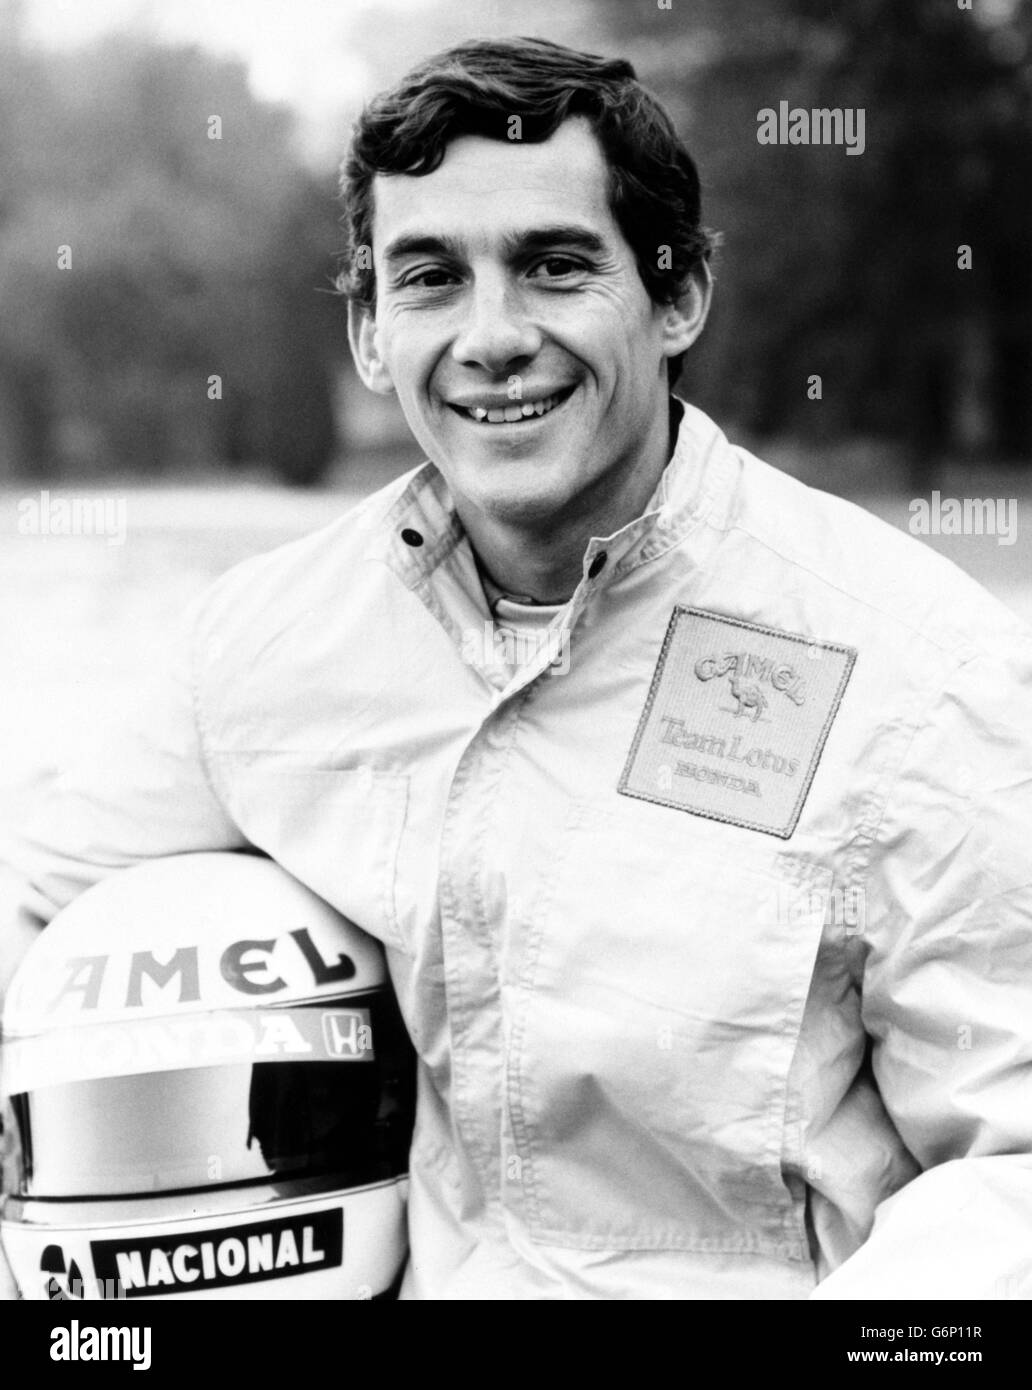 Brazilian racing driver Ayrton Senna, 27, who is again driving for Lotus this season under their new sponsor 'Camel Cigarettes' and with new engines by Honda. Stock Photo